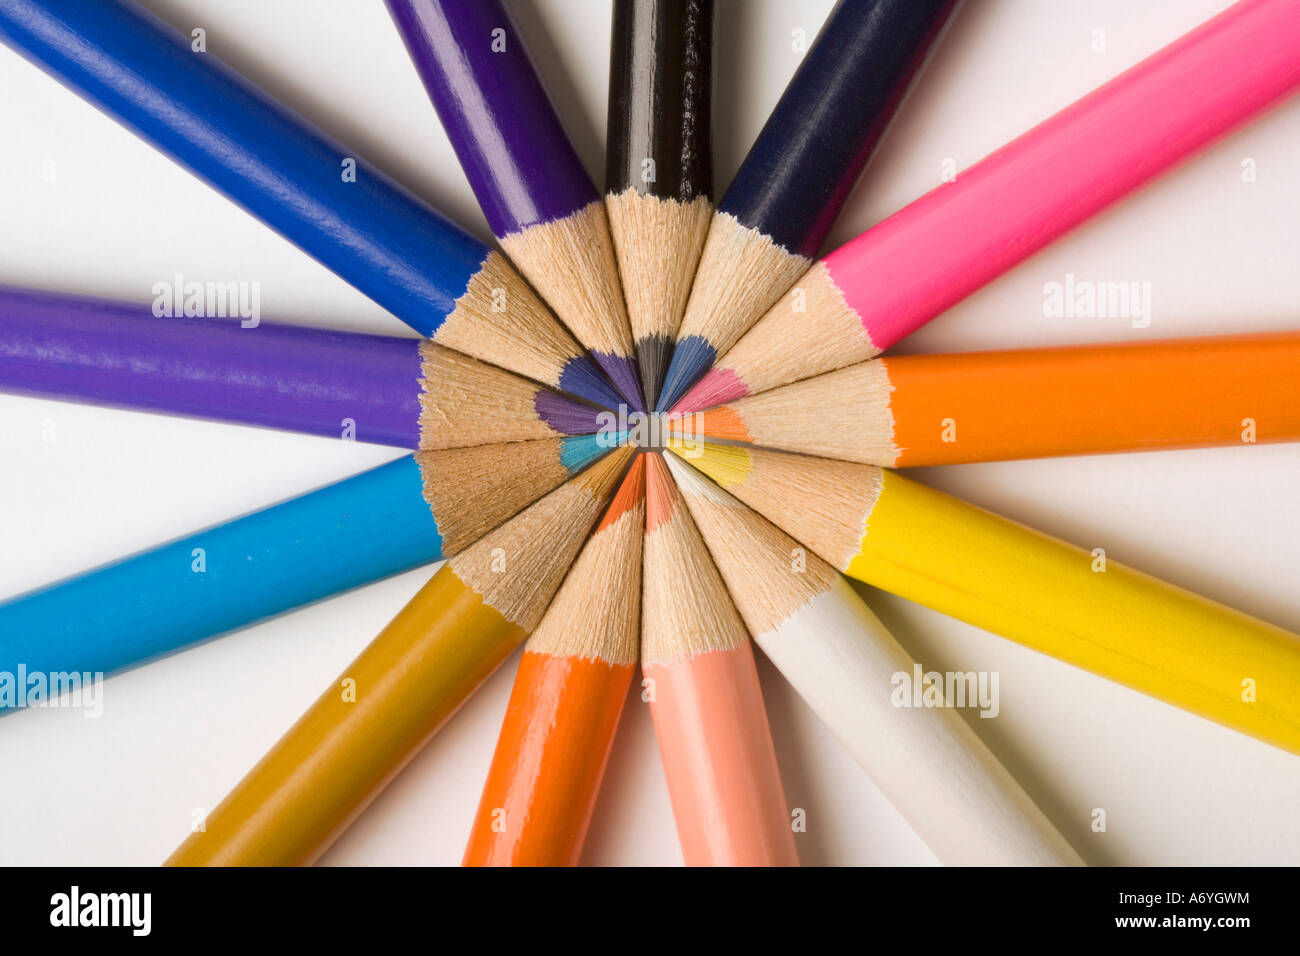 Colored pencils arranged in a circle Stock Photo